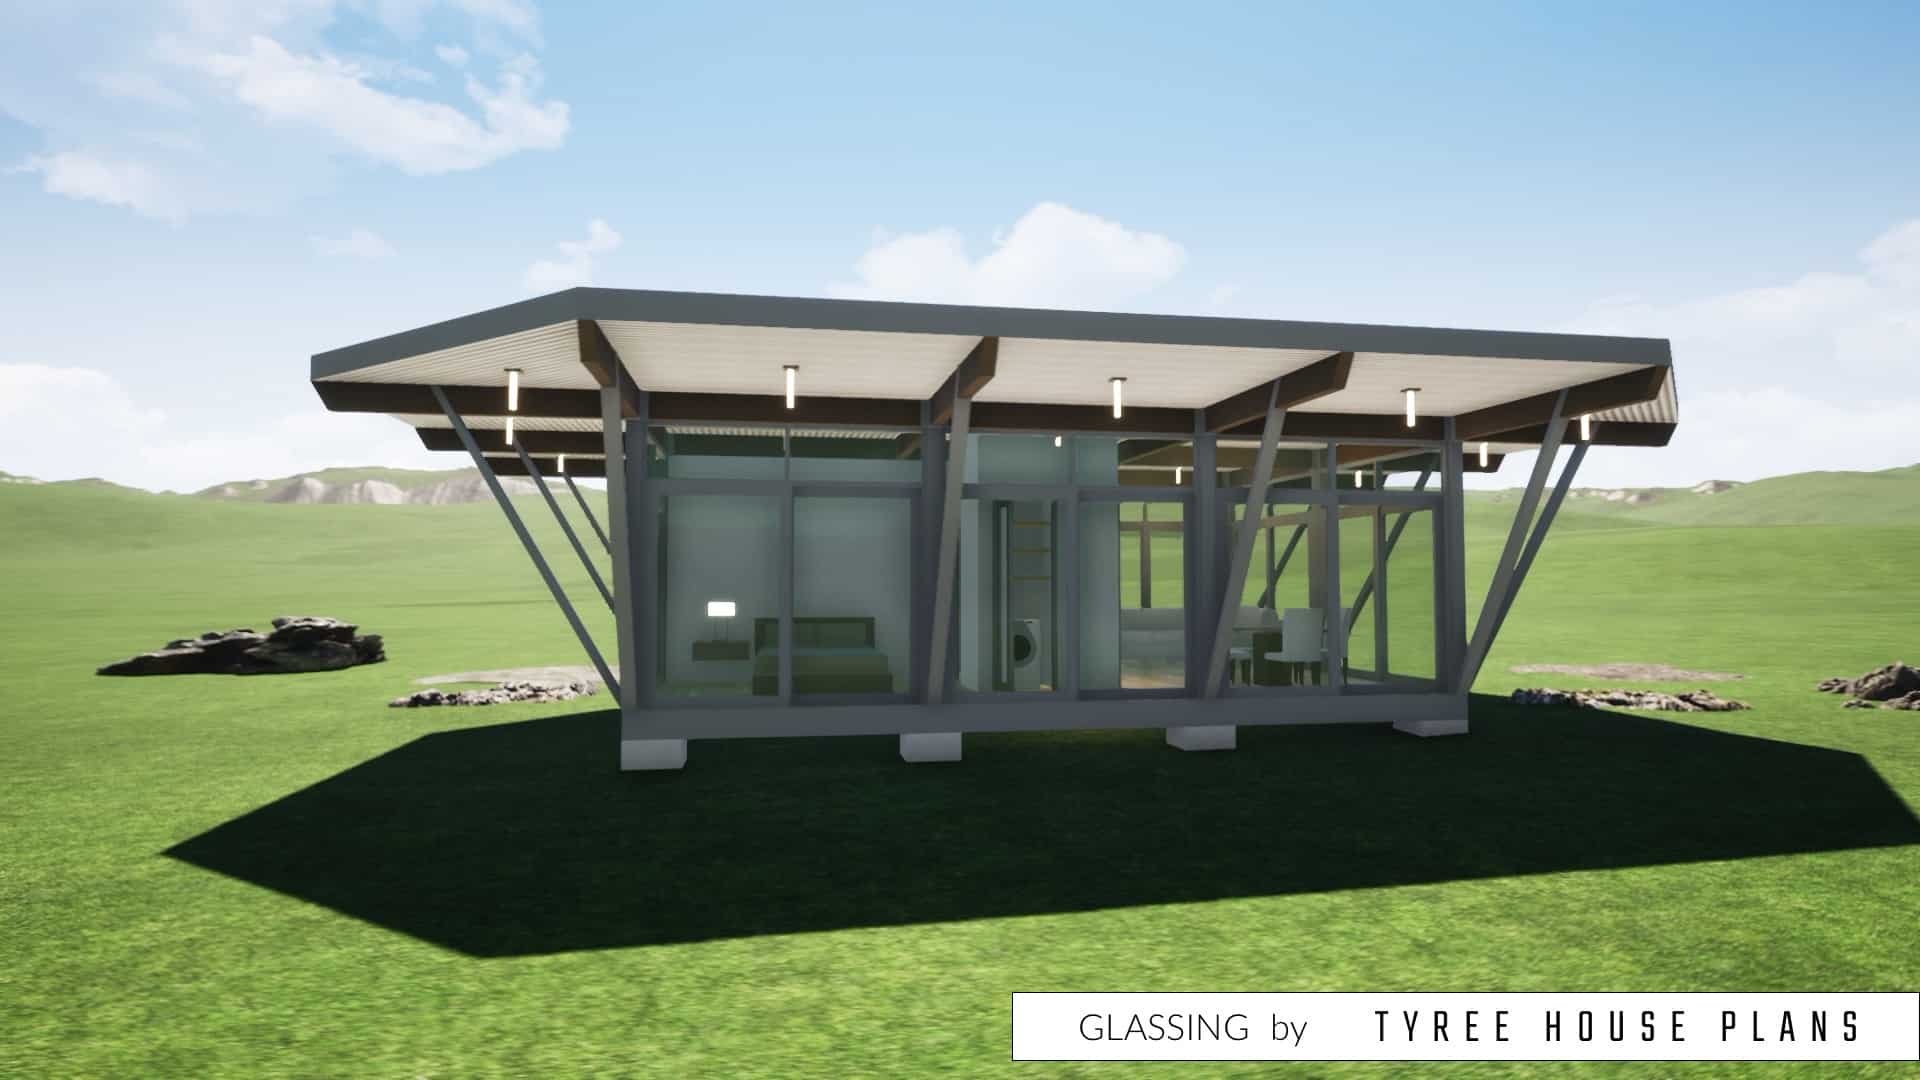 Glassing by Tyree House Plans.